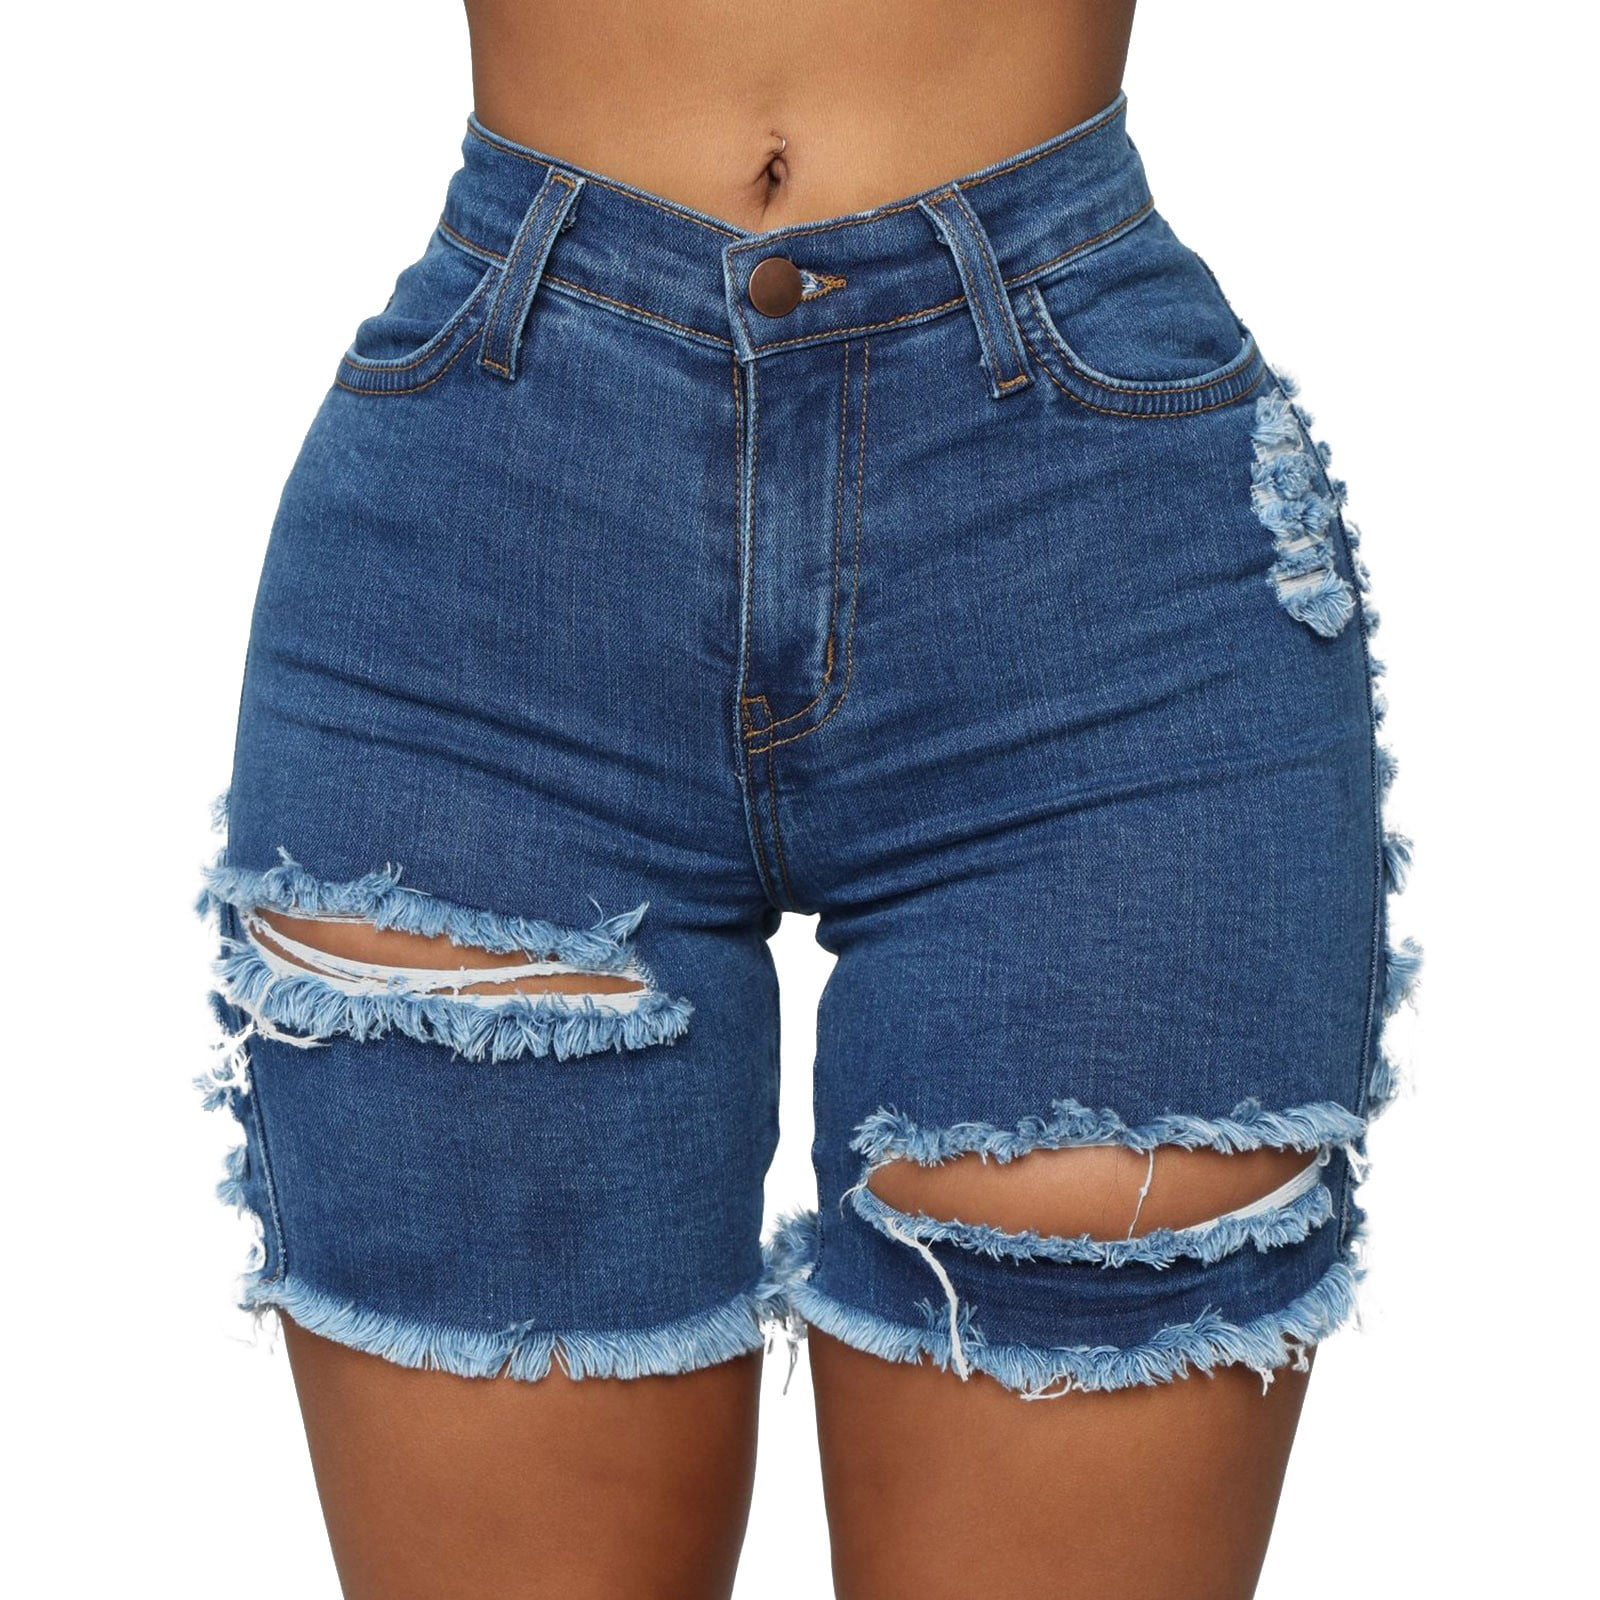 Stretchy Bermuda Jean Shorts for Women High Rise Distressed Ripped Hemline  Casual Loose Summer Denim Shorts (Blue, S) at Amazon Women's Clothing store